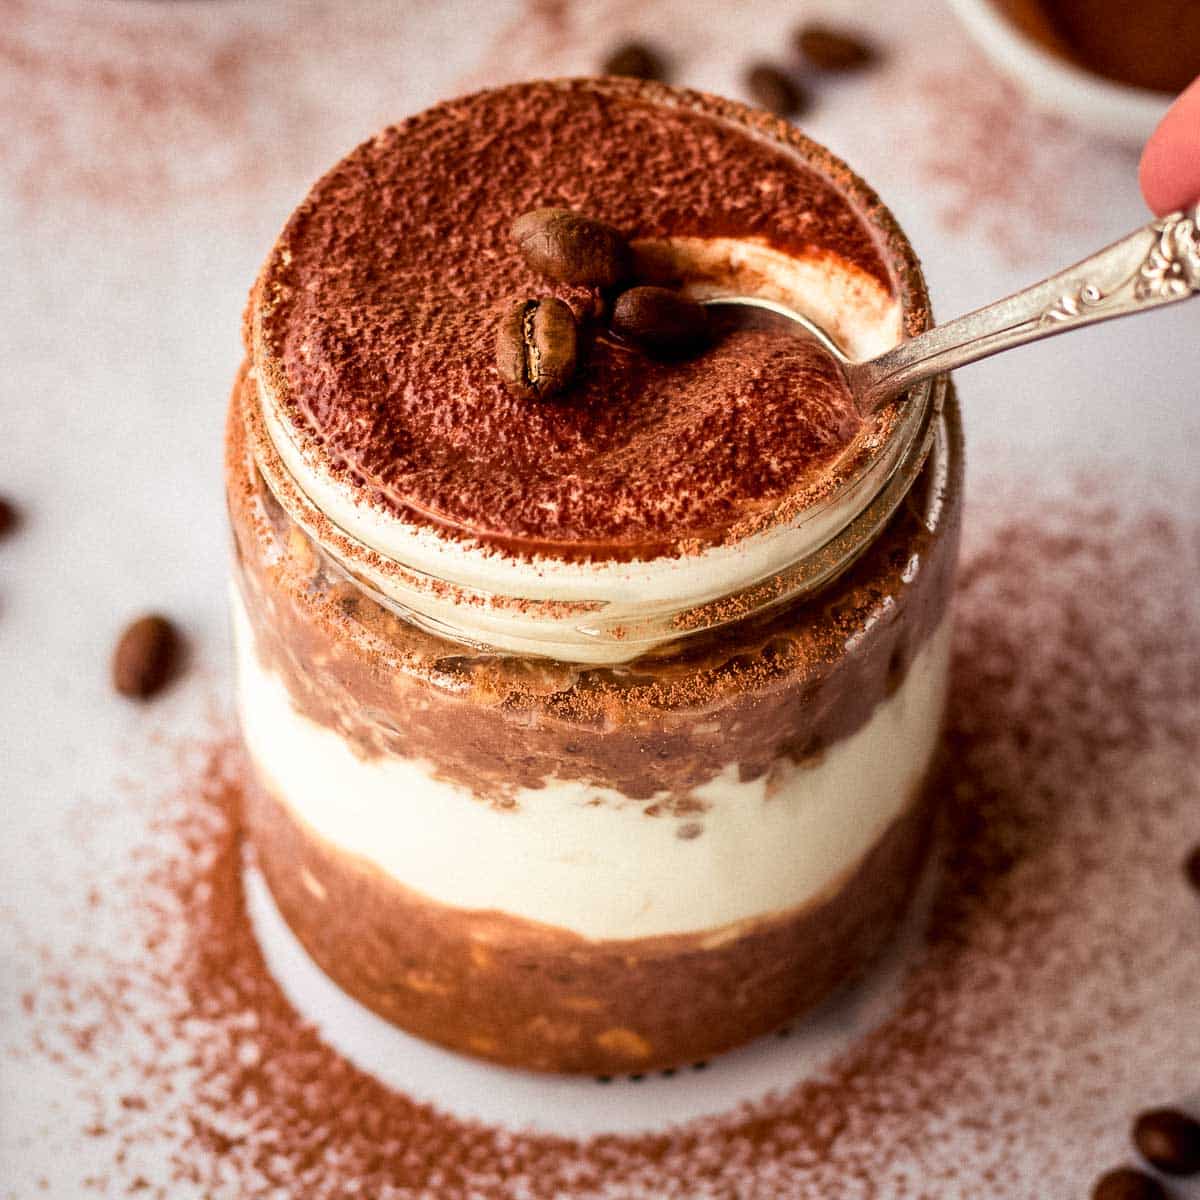 A spoonful of tiramisu overnight oats is taken from a glass jar, decorated with coffee beans and cac